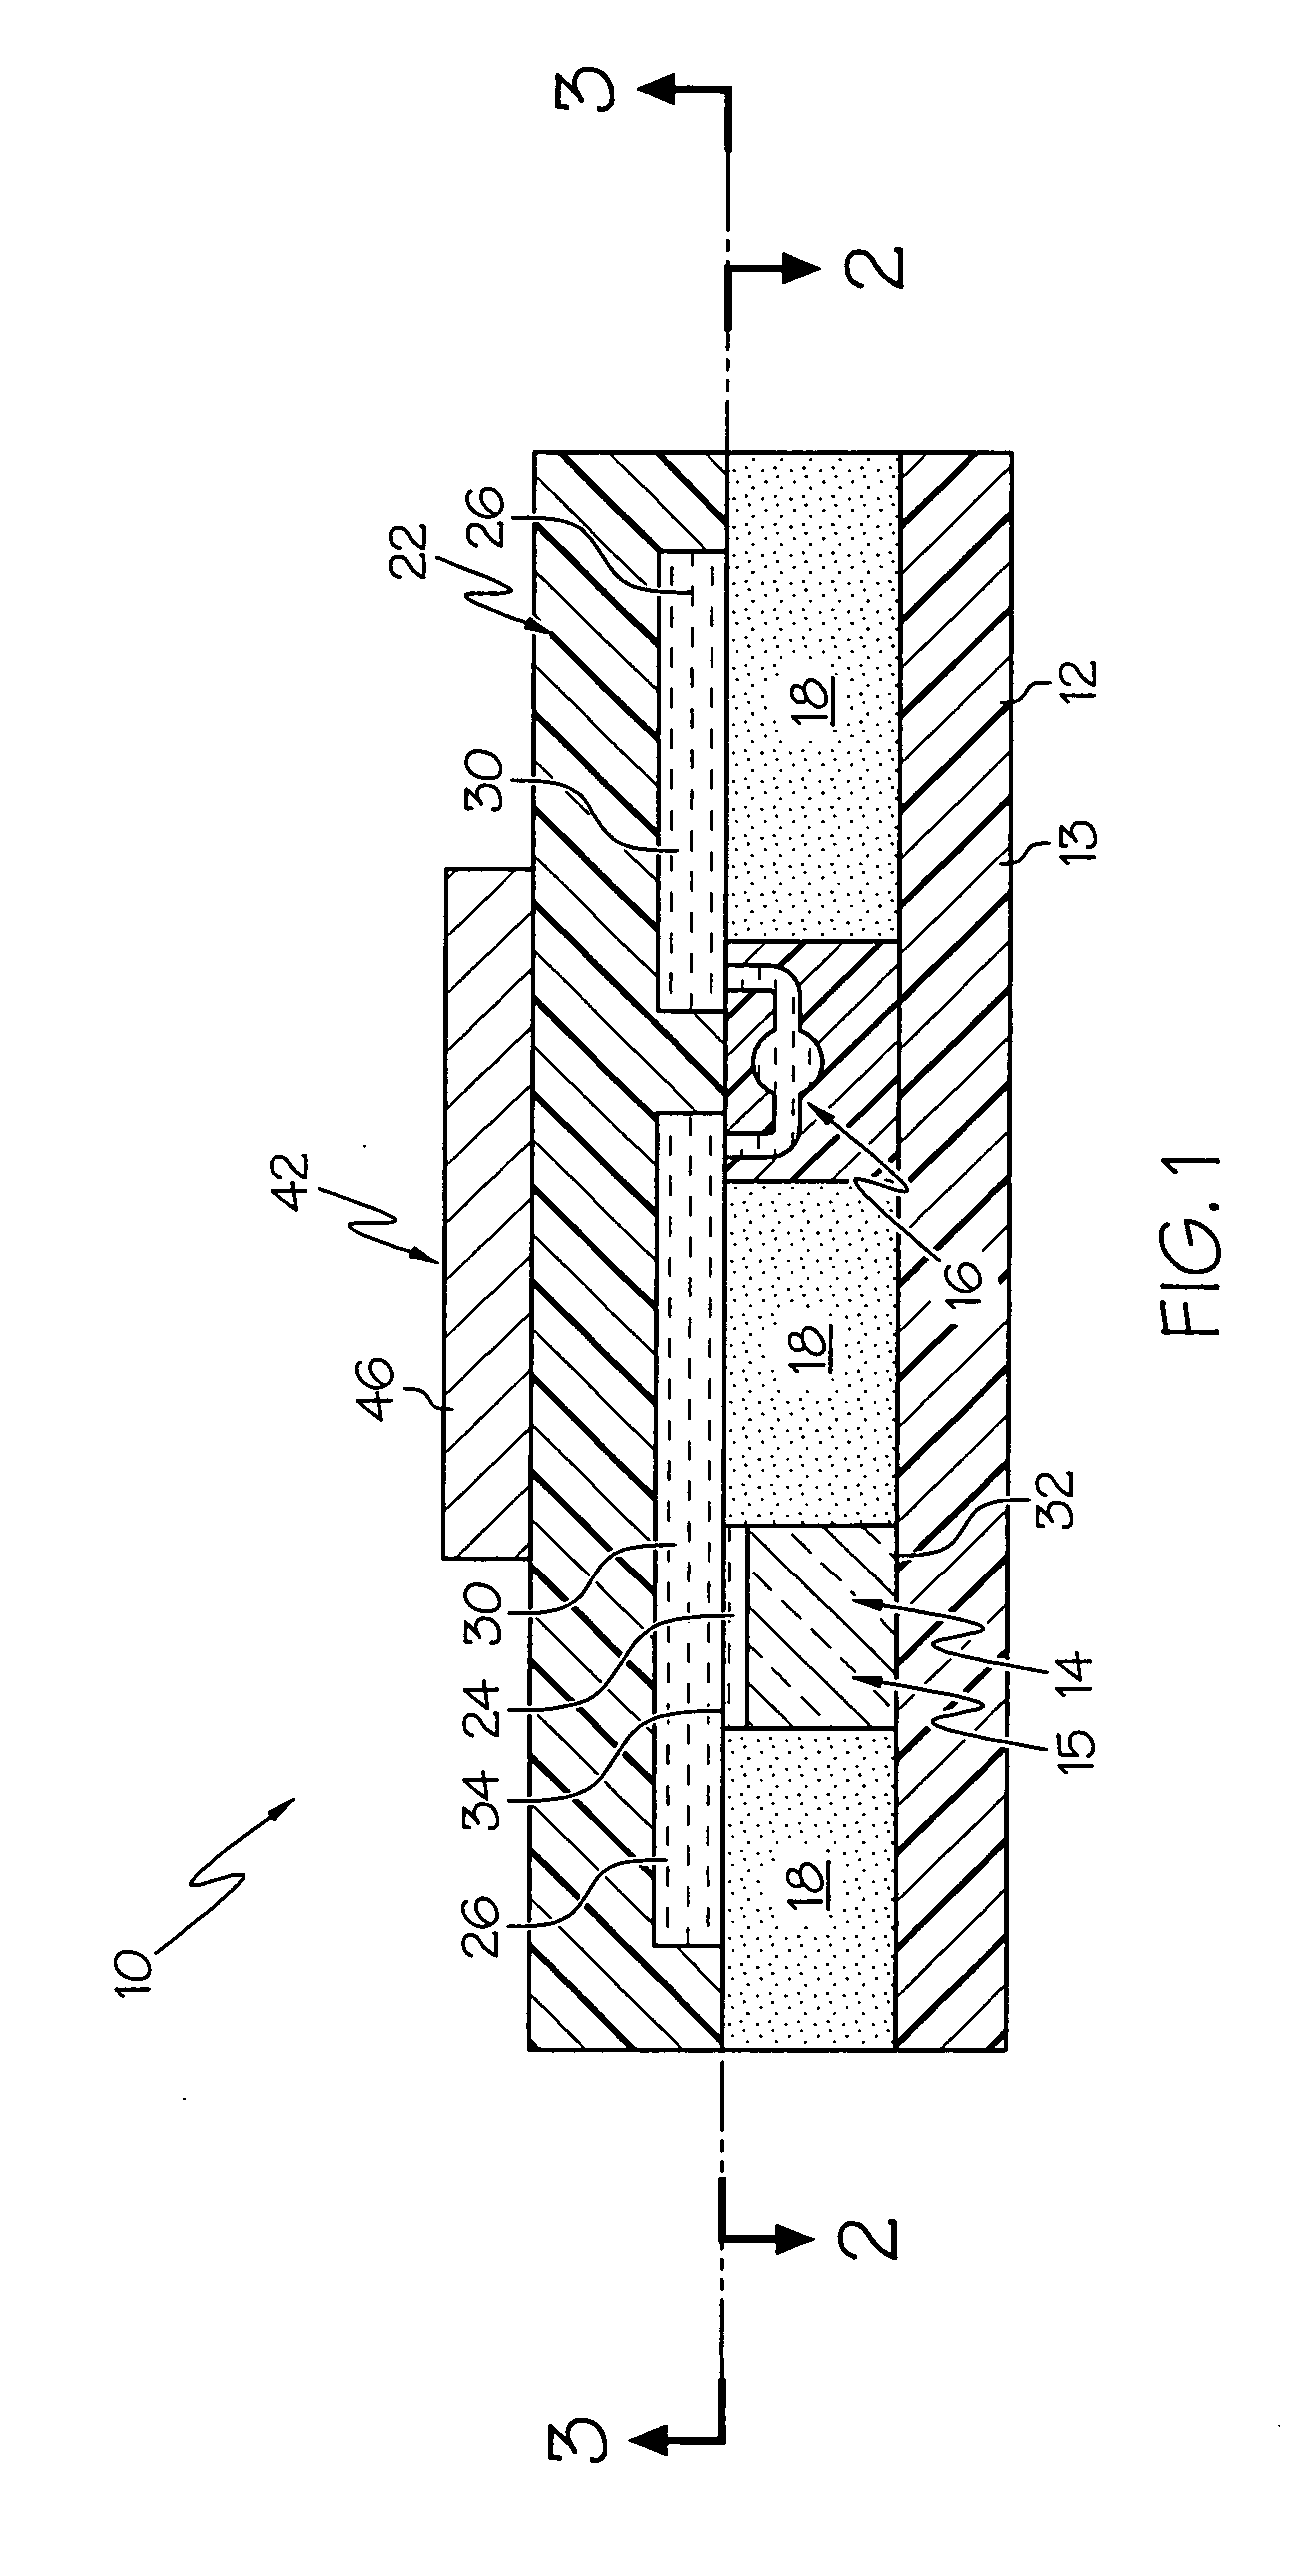 Cooled electronic assembly and method for cooling a printed circuit board